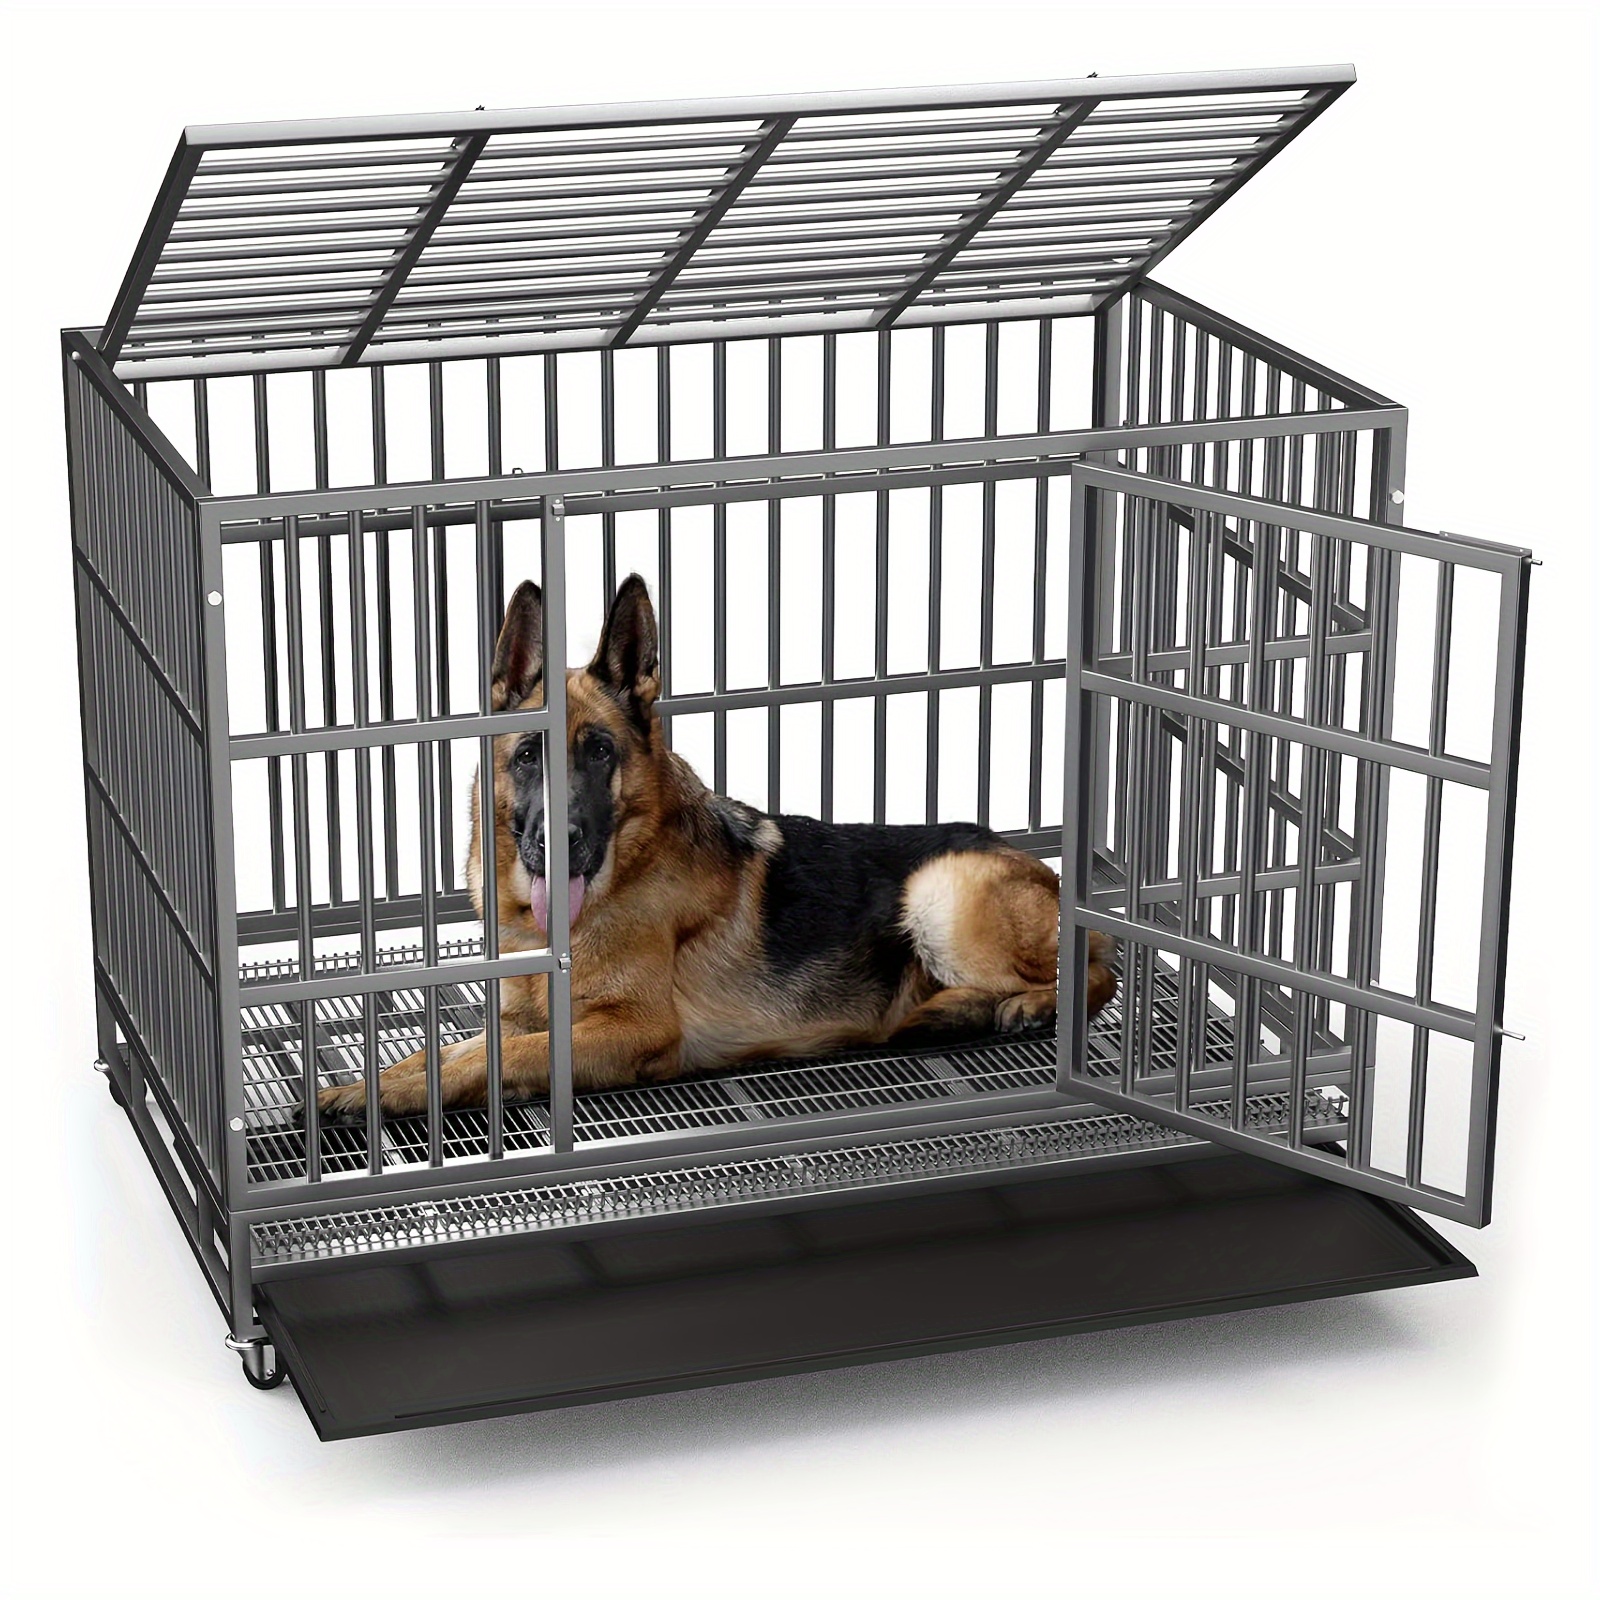 

Lemberi 48/38 Inch Heavy Duty Dog Crate, Escape Proof Dog Cage Kennel With Lockable Wheels, High Anxiety Double Door Dog Crate, Extra Large Crate Indoor For Large Dog With Removable Tray